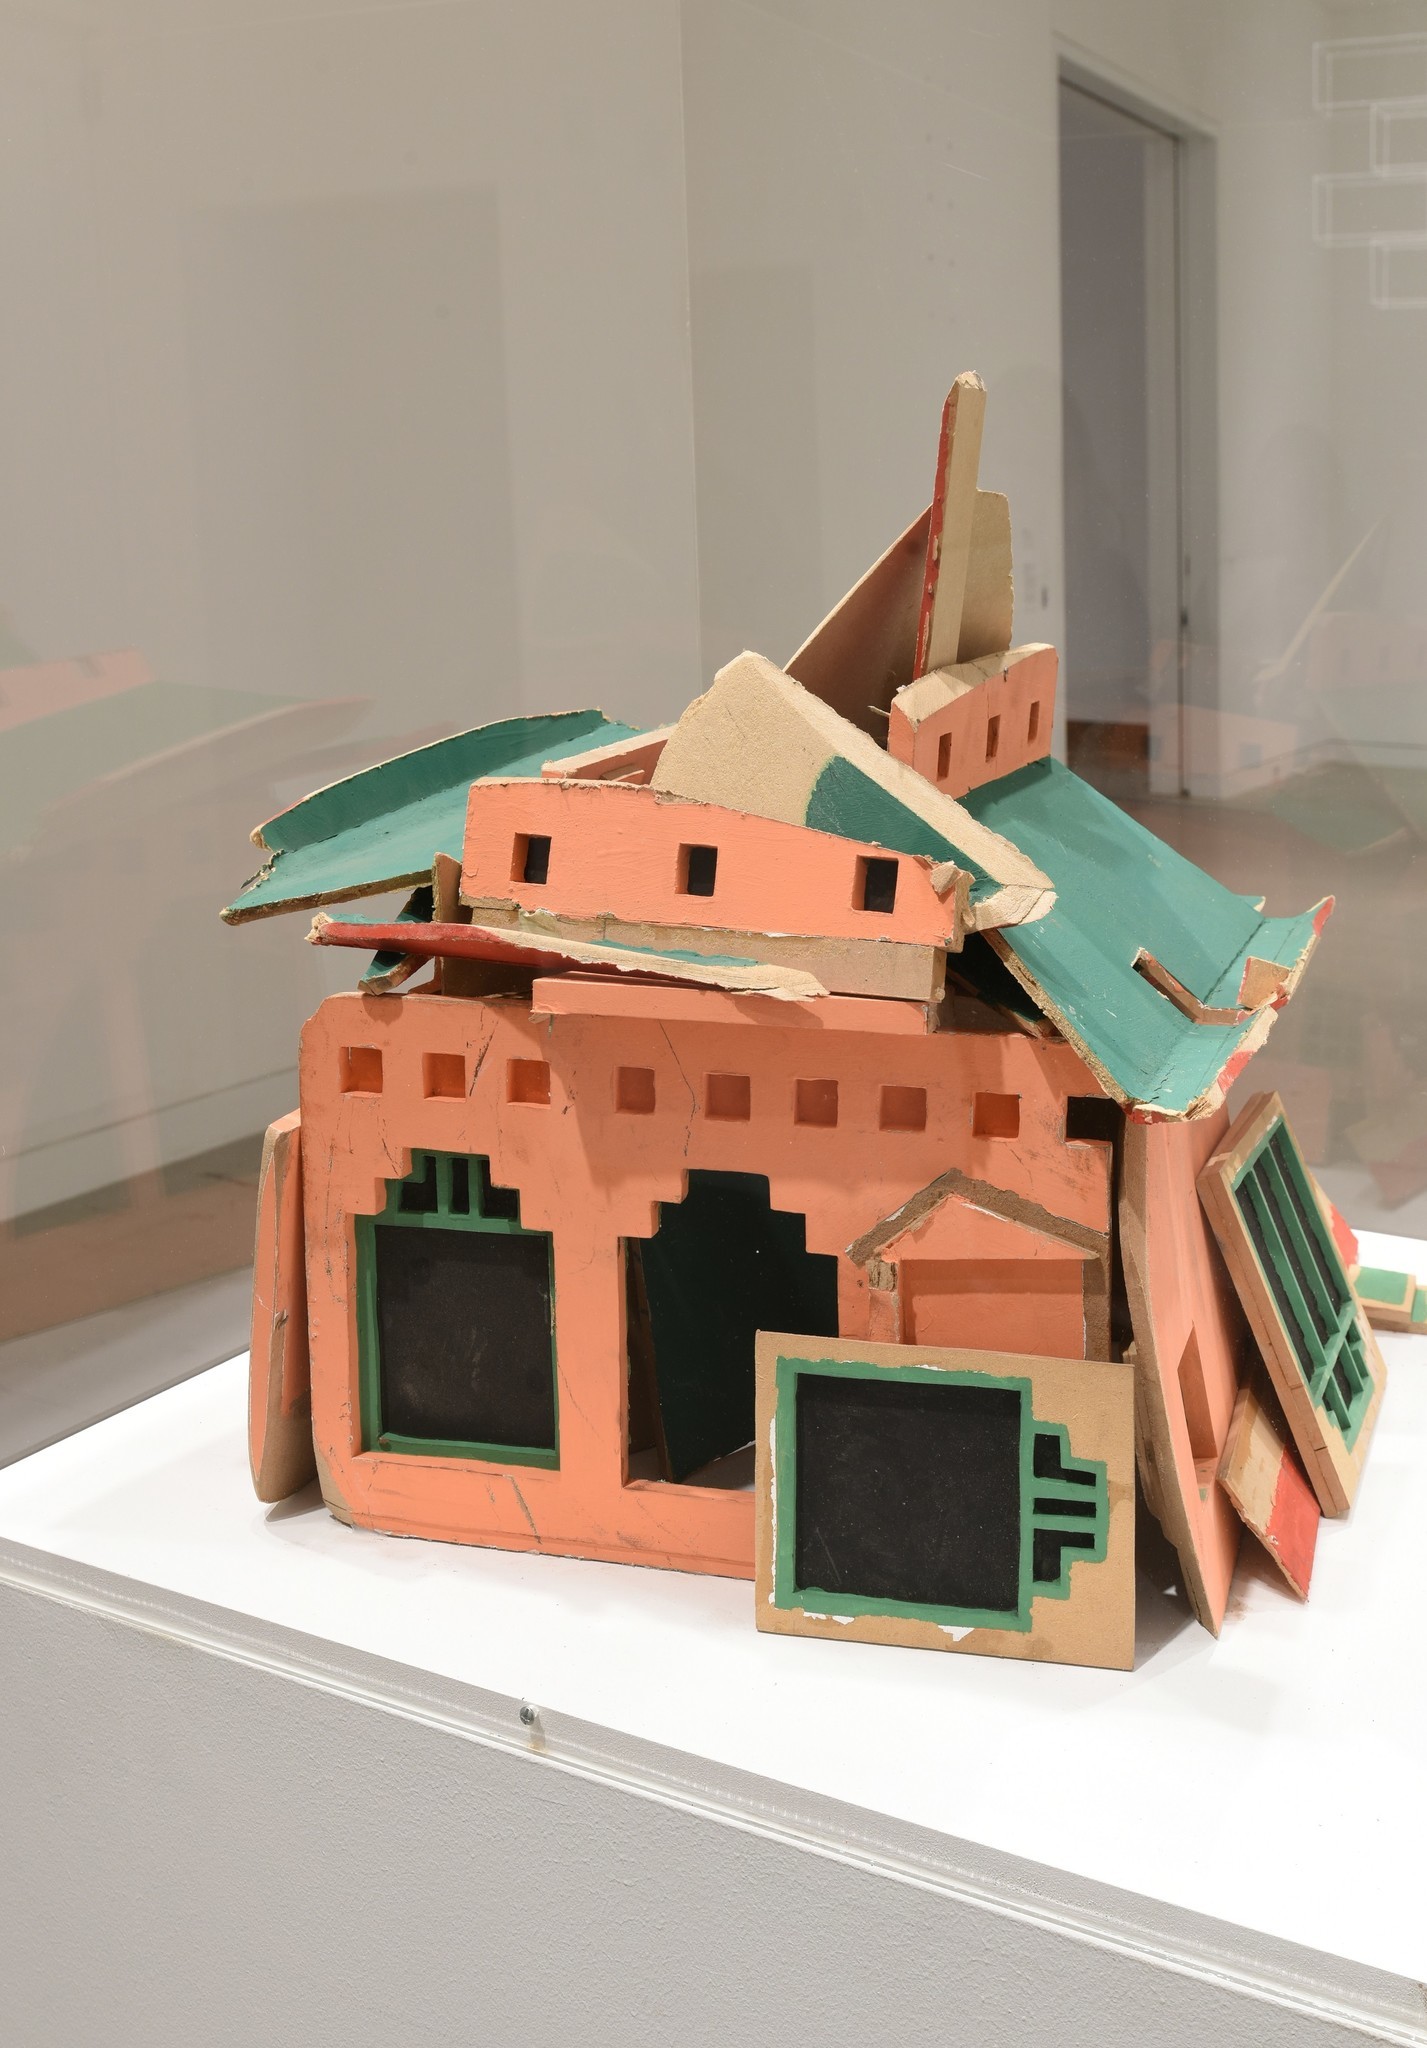 Pilar Quinteros, "China House Great Journey (detail)," 2017, painted wood model